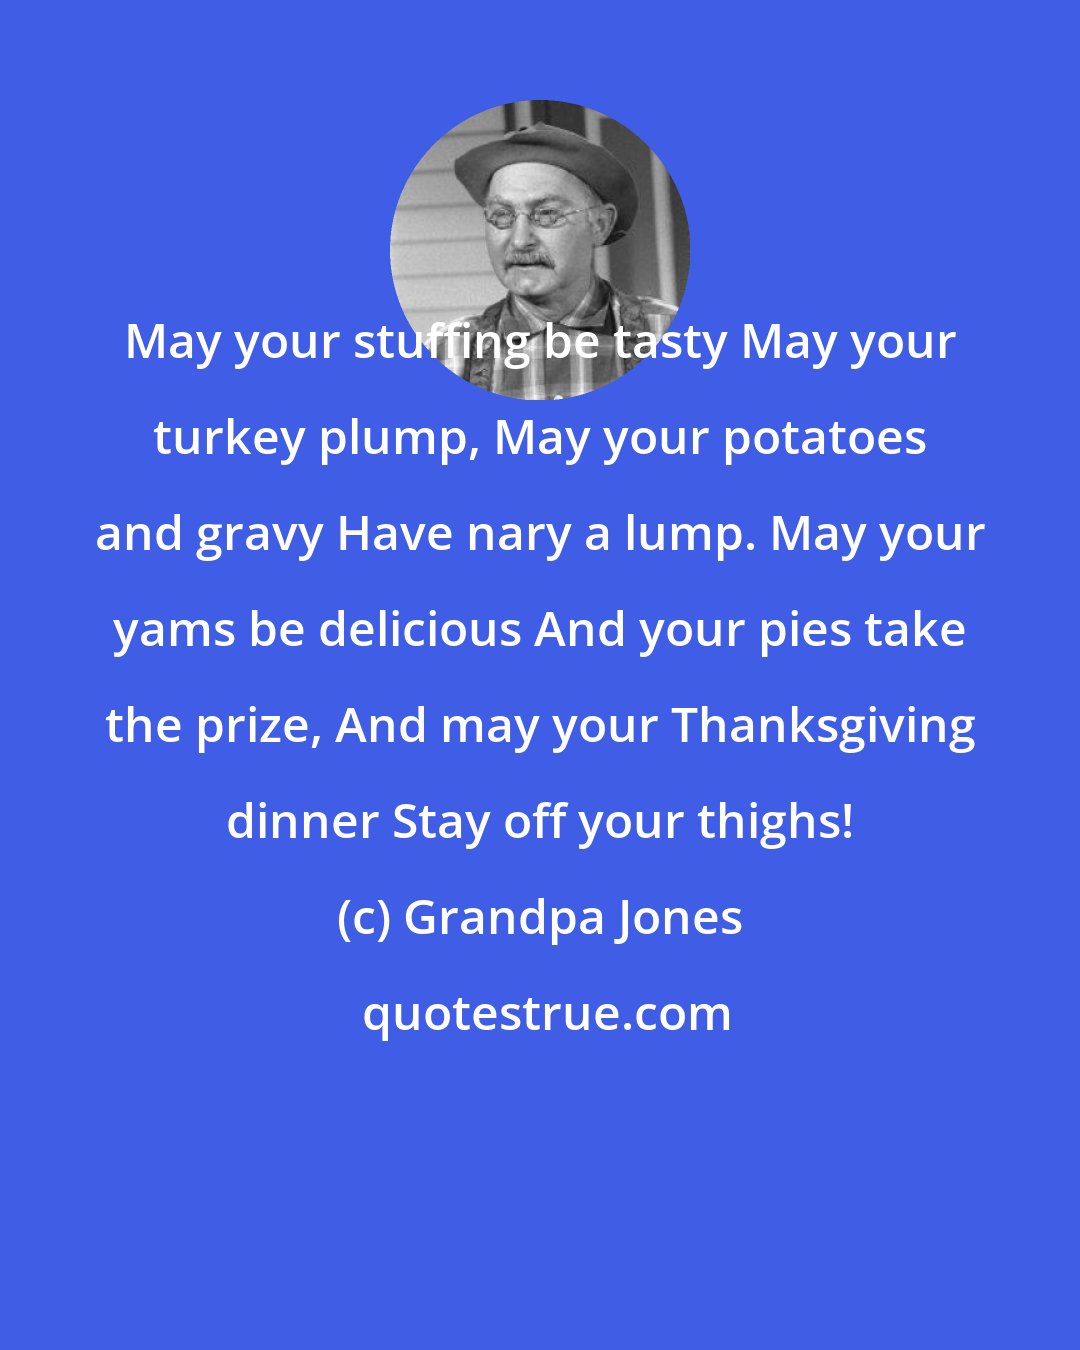 Grandpa Jones: May your stuffing be tasty May your turkey plump, May your potatoes and gravy Have nary a lump. May your yams be delicious And your pies take the prize, And may your Thanksgiving dinner Stay off your thighs!